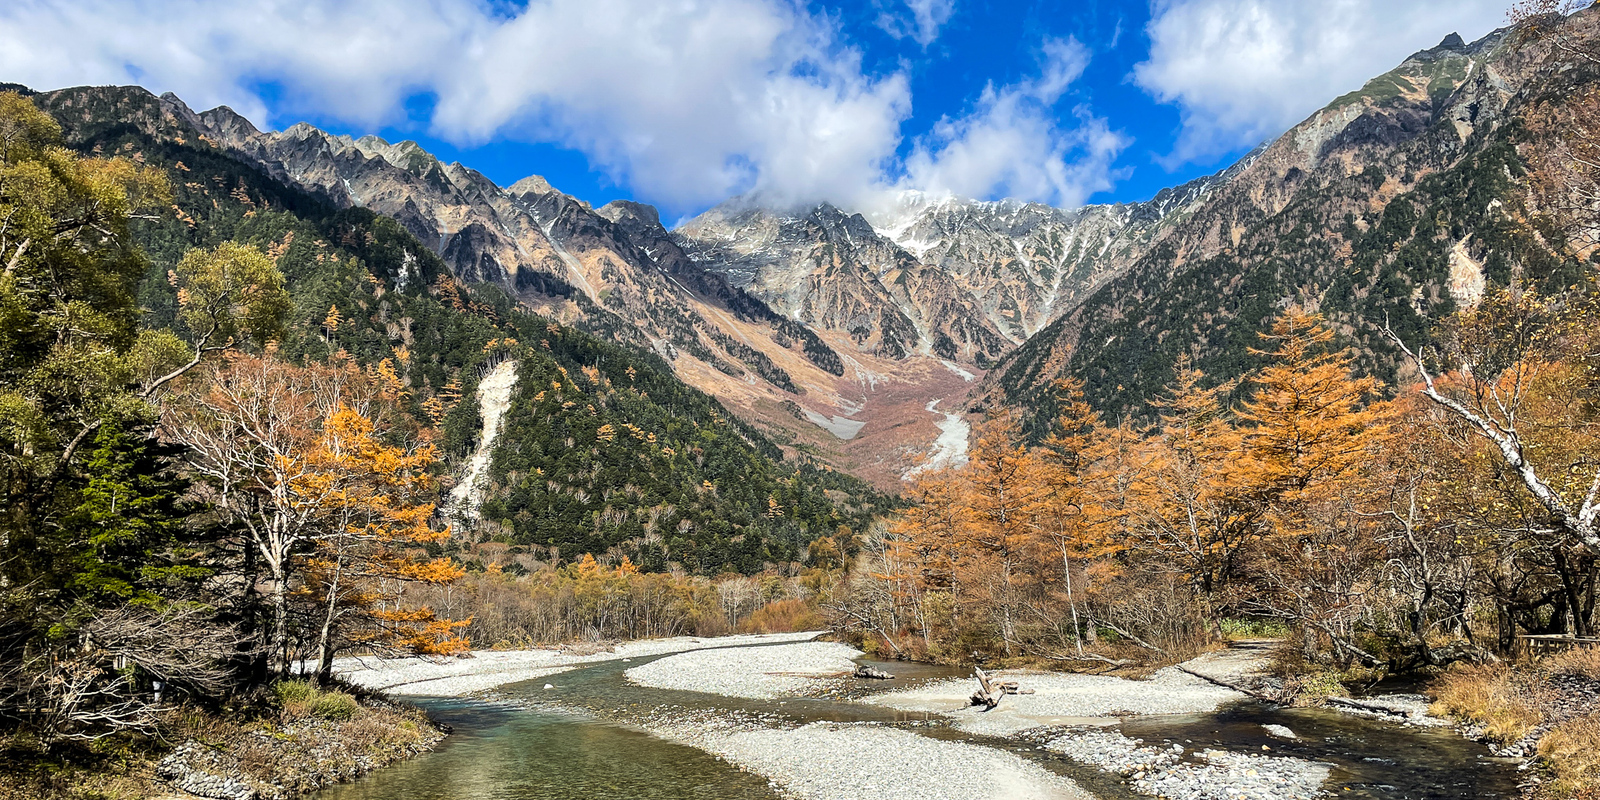 A Two Day Trip to Norikura and Kamikochi